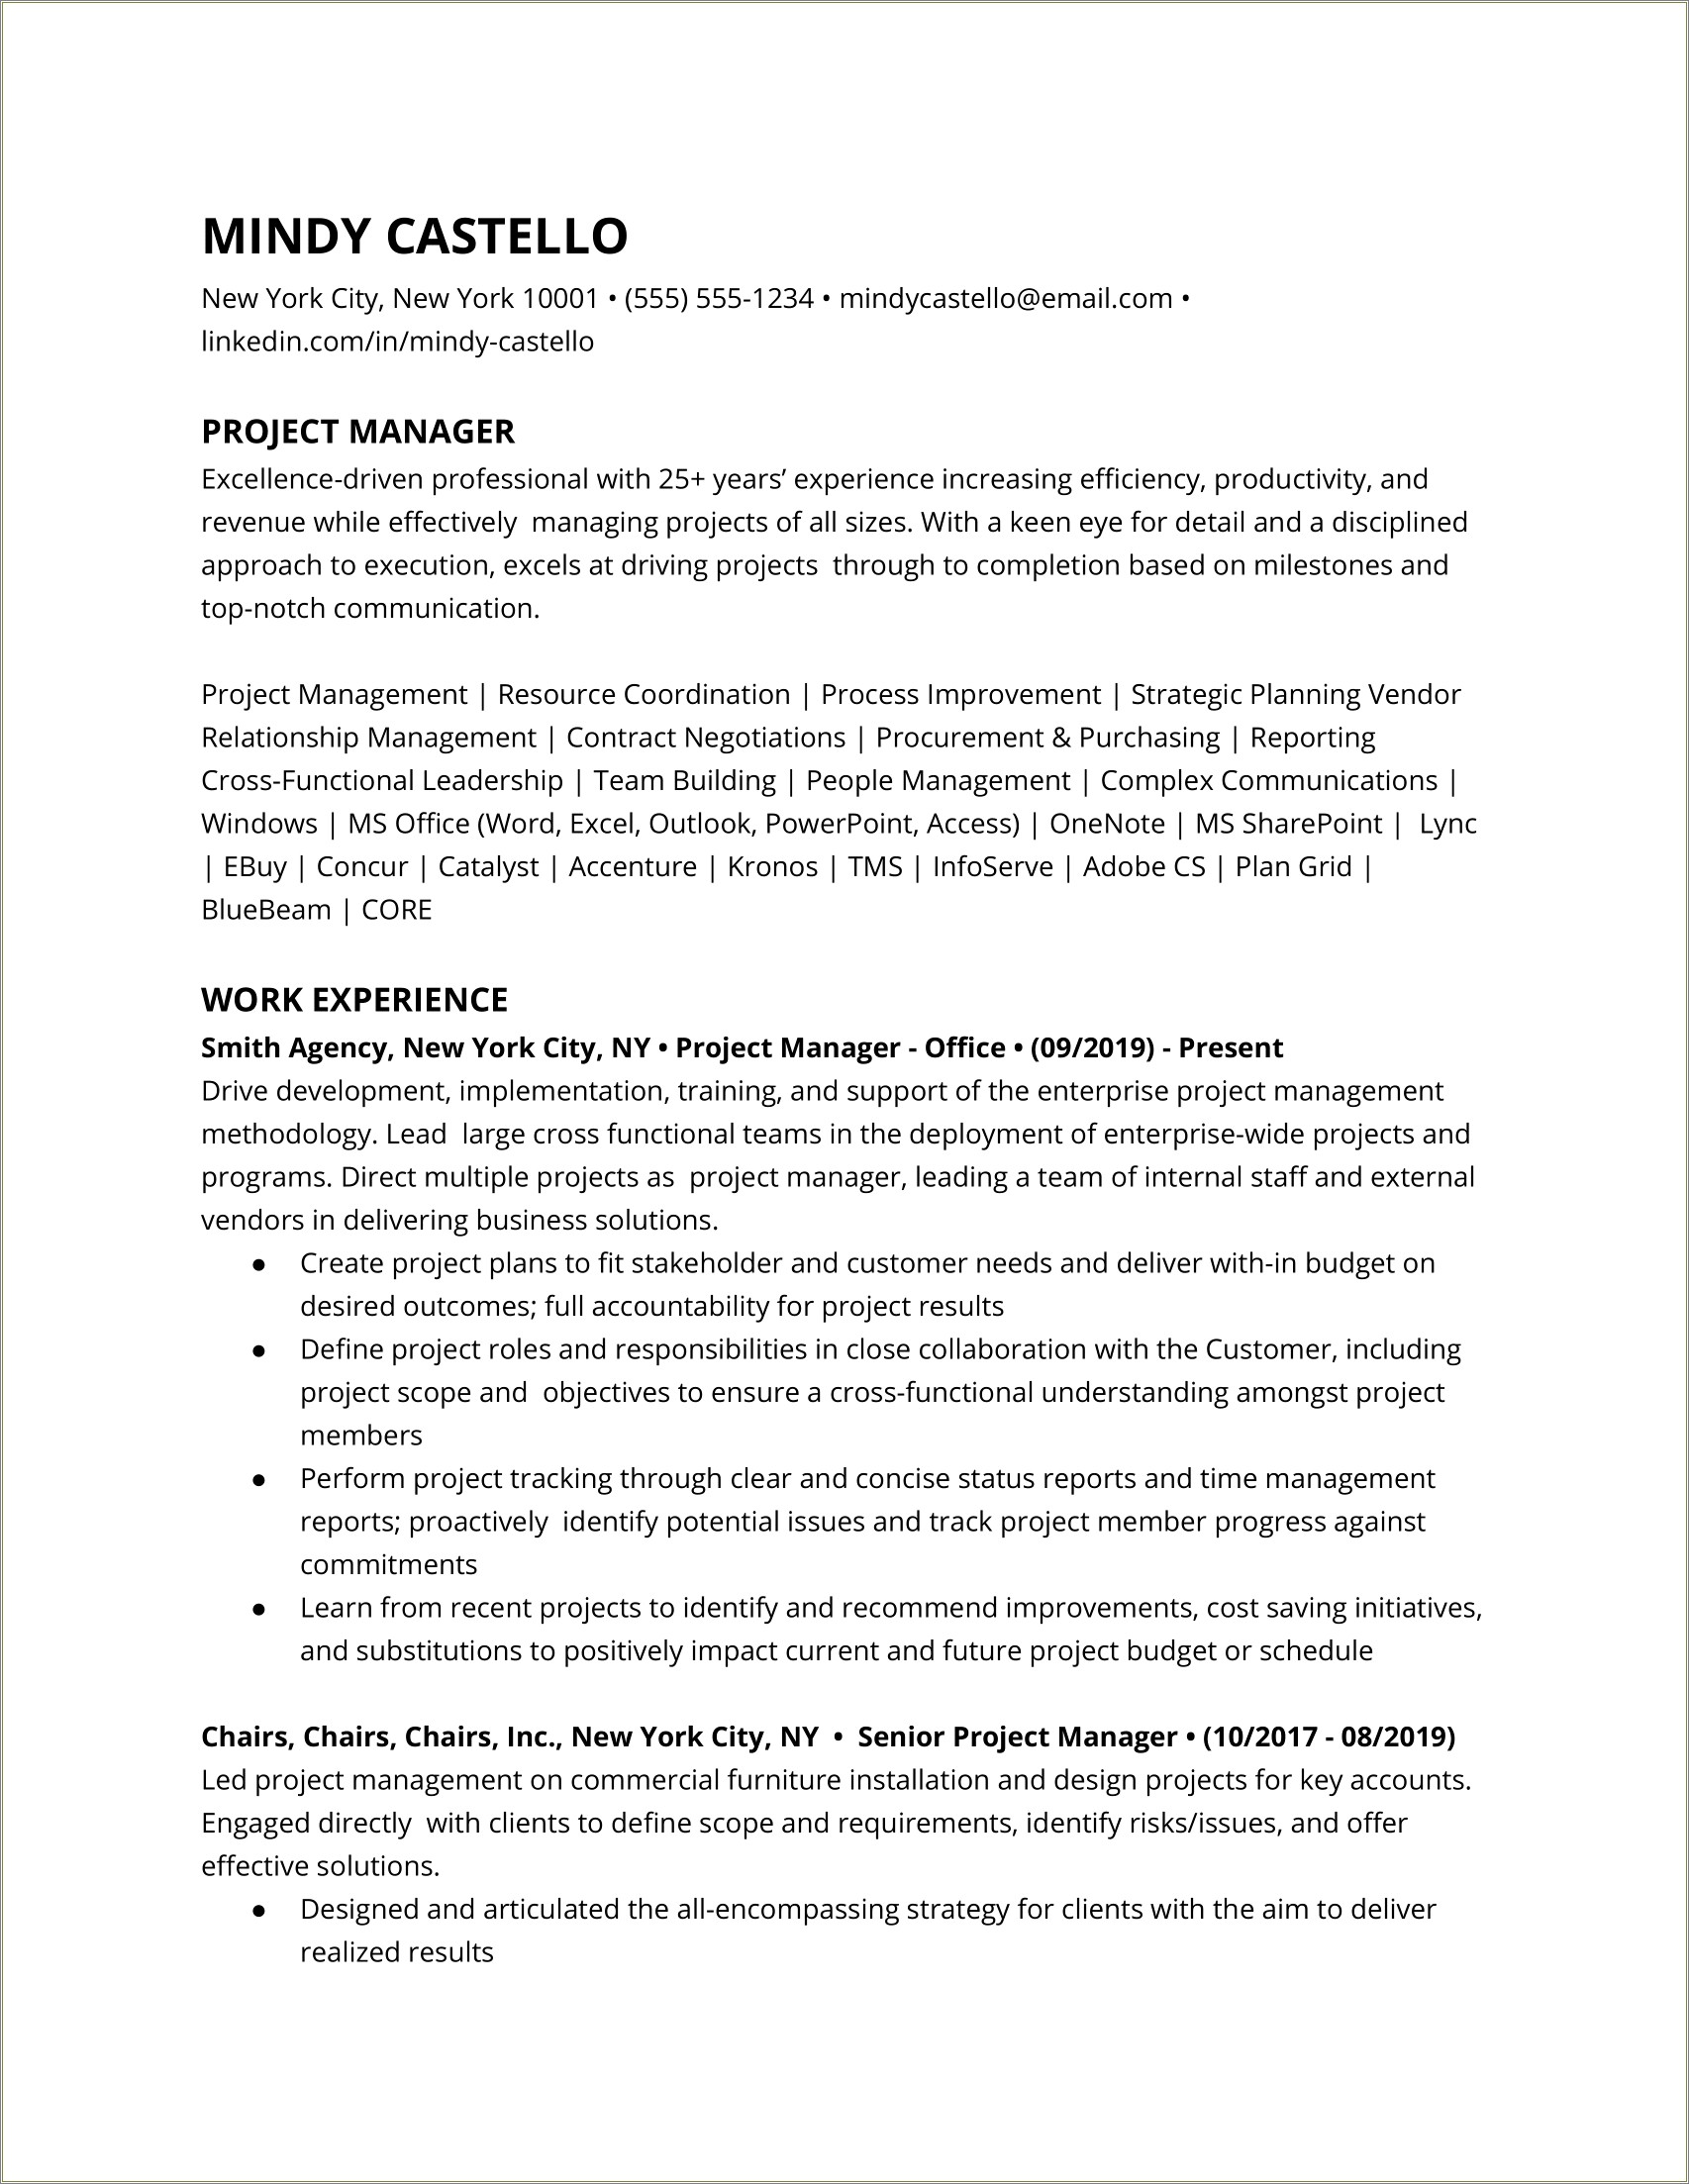 Resume For Creating A Website And Managing It